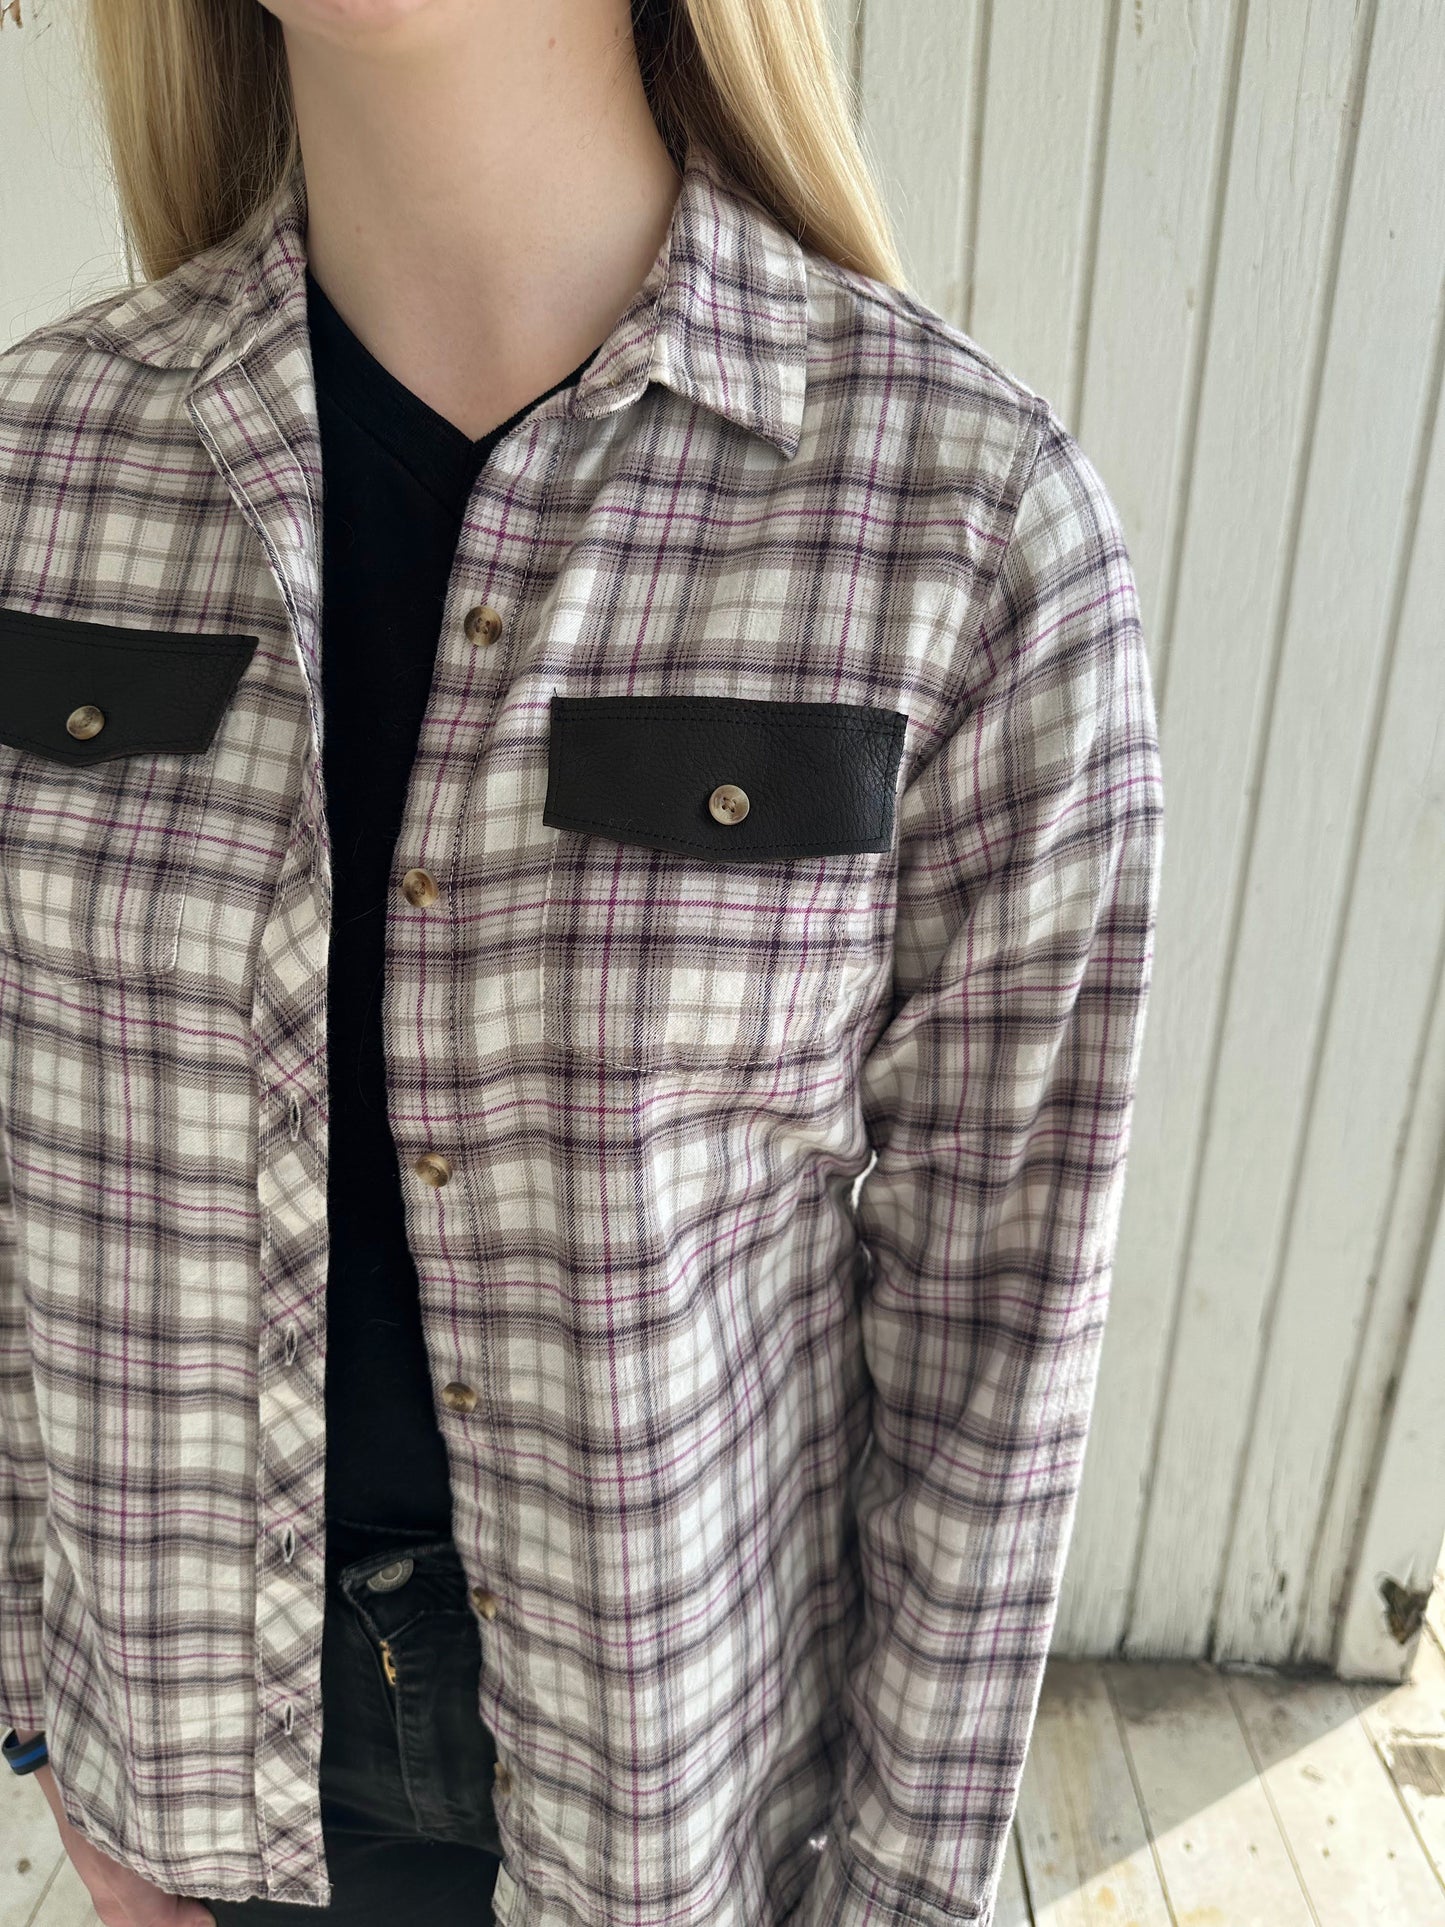 Flannel with Leather Pocket Lapels, size sm